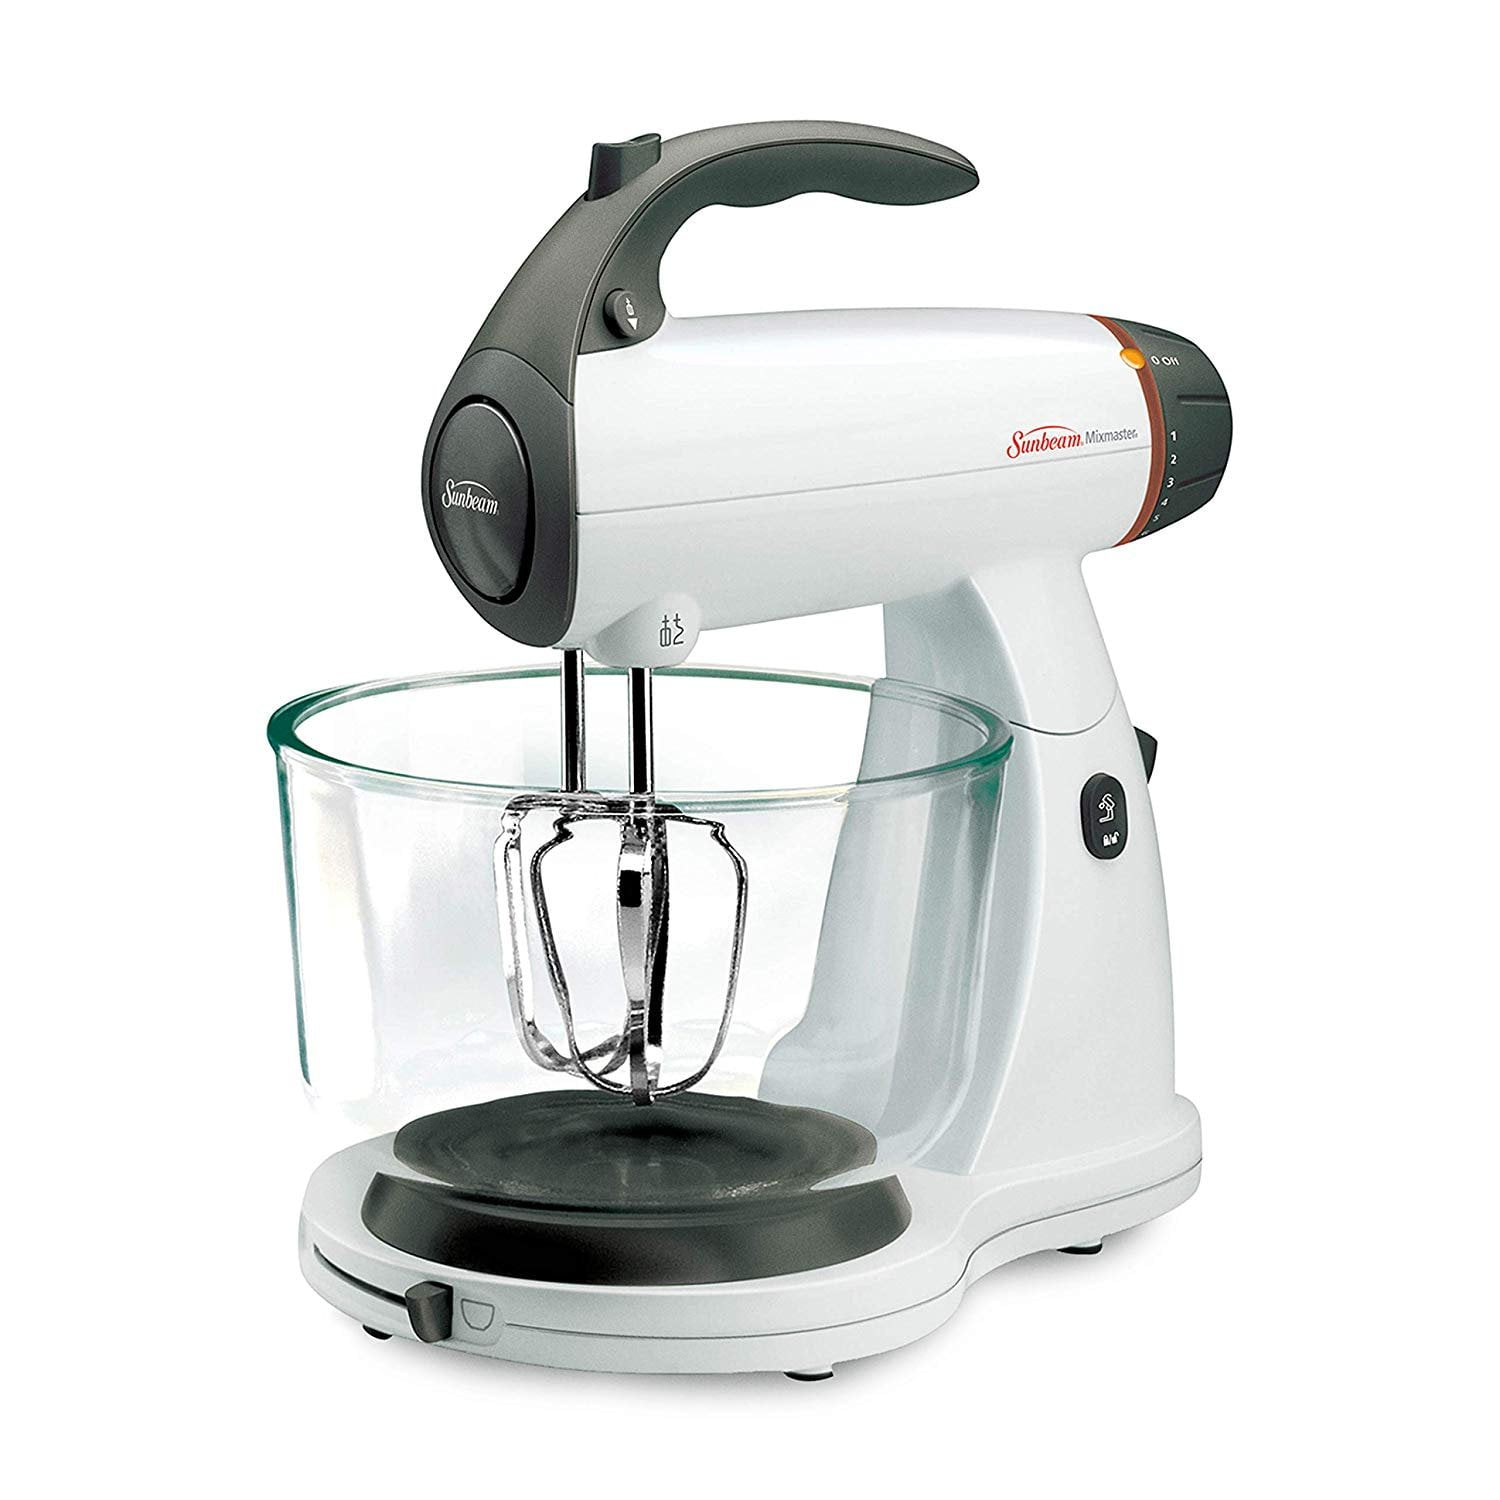 Sunbeam® Mixmaster® Planetary Stand Mixer Slow Juicer Attachment